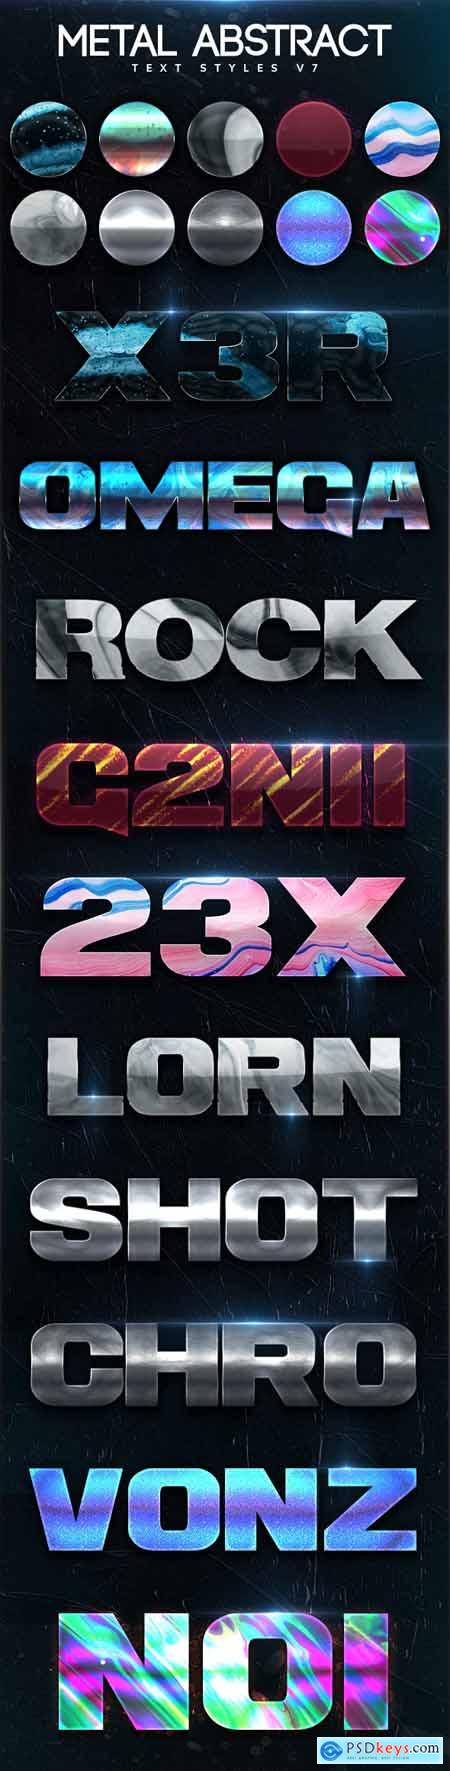 Metal Abstract Text Styles V7 26412923